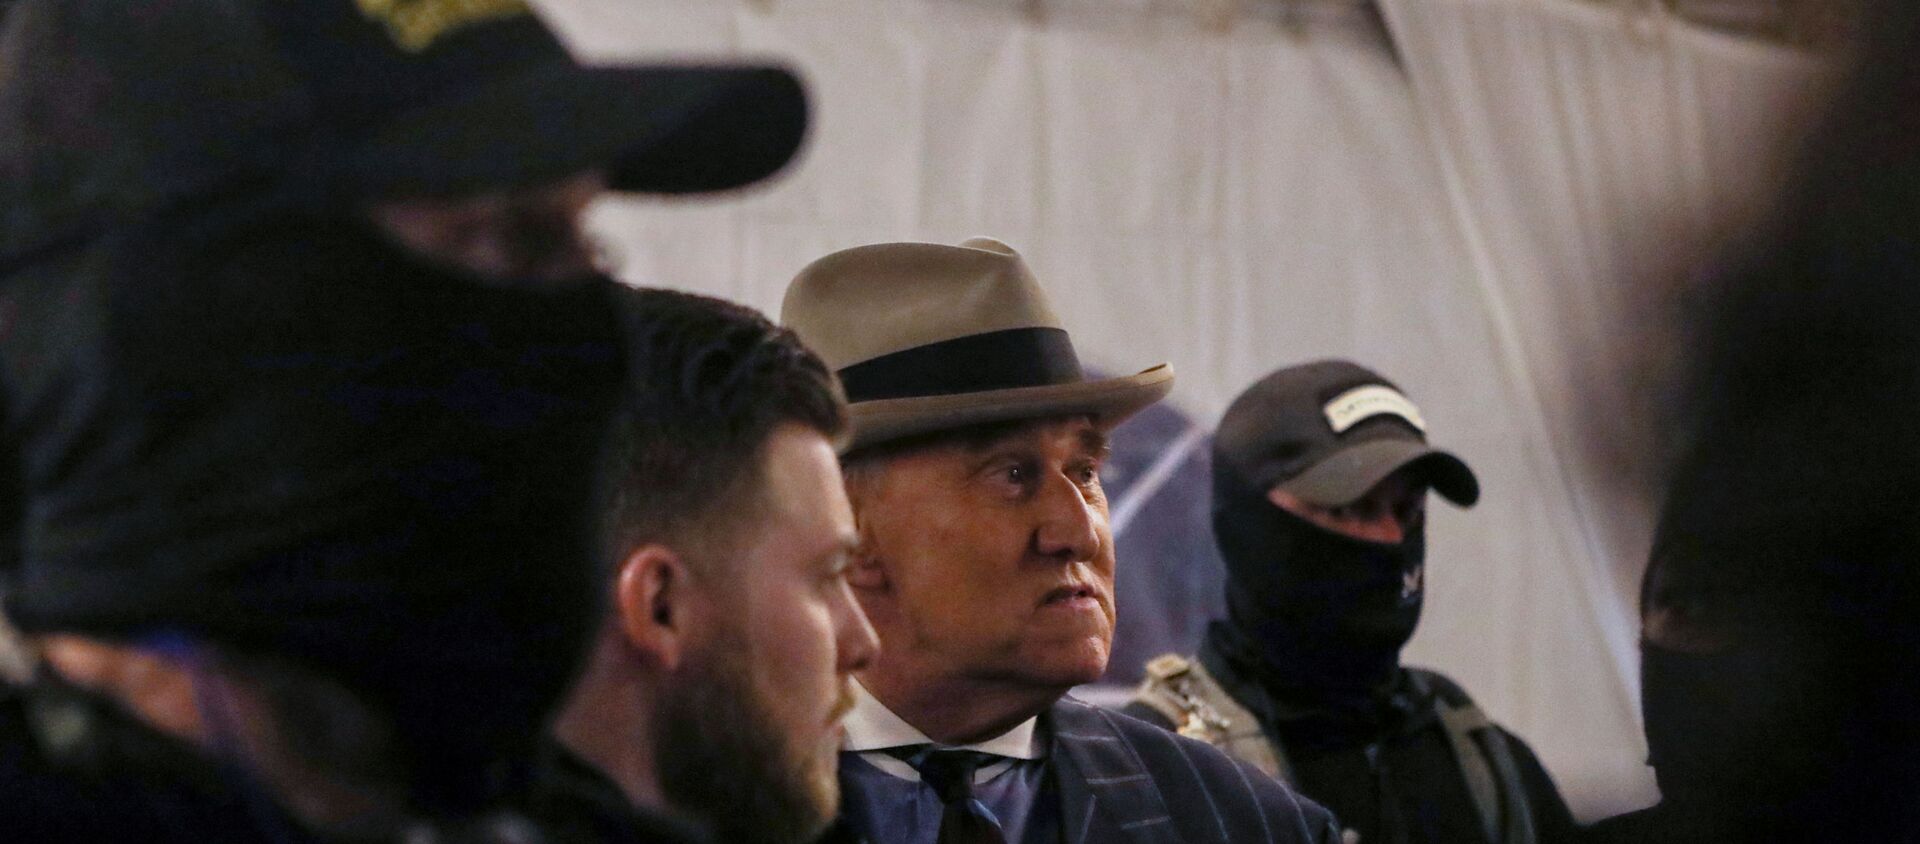 Members of the Oath Keepers provide security to Roger Stone at a rally the night before groups attacked the US Capitol, in Washington, US, 5 January 2021 - Sputnik International, 1920, 15.02.2021